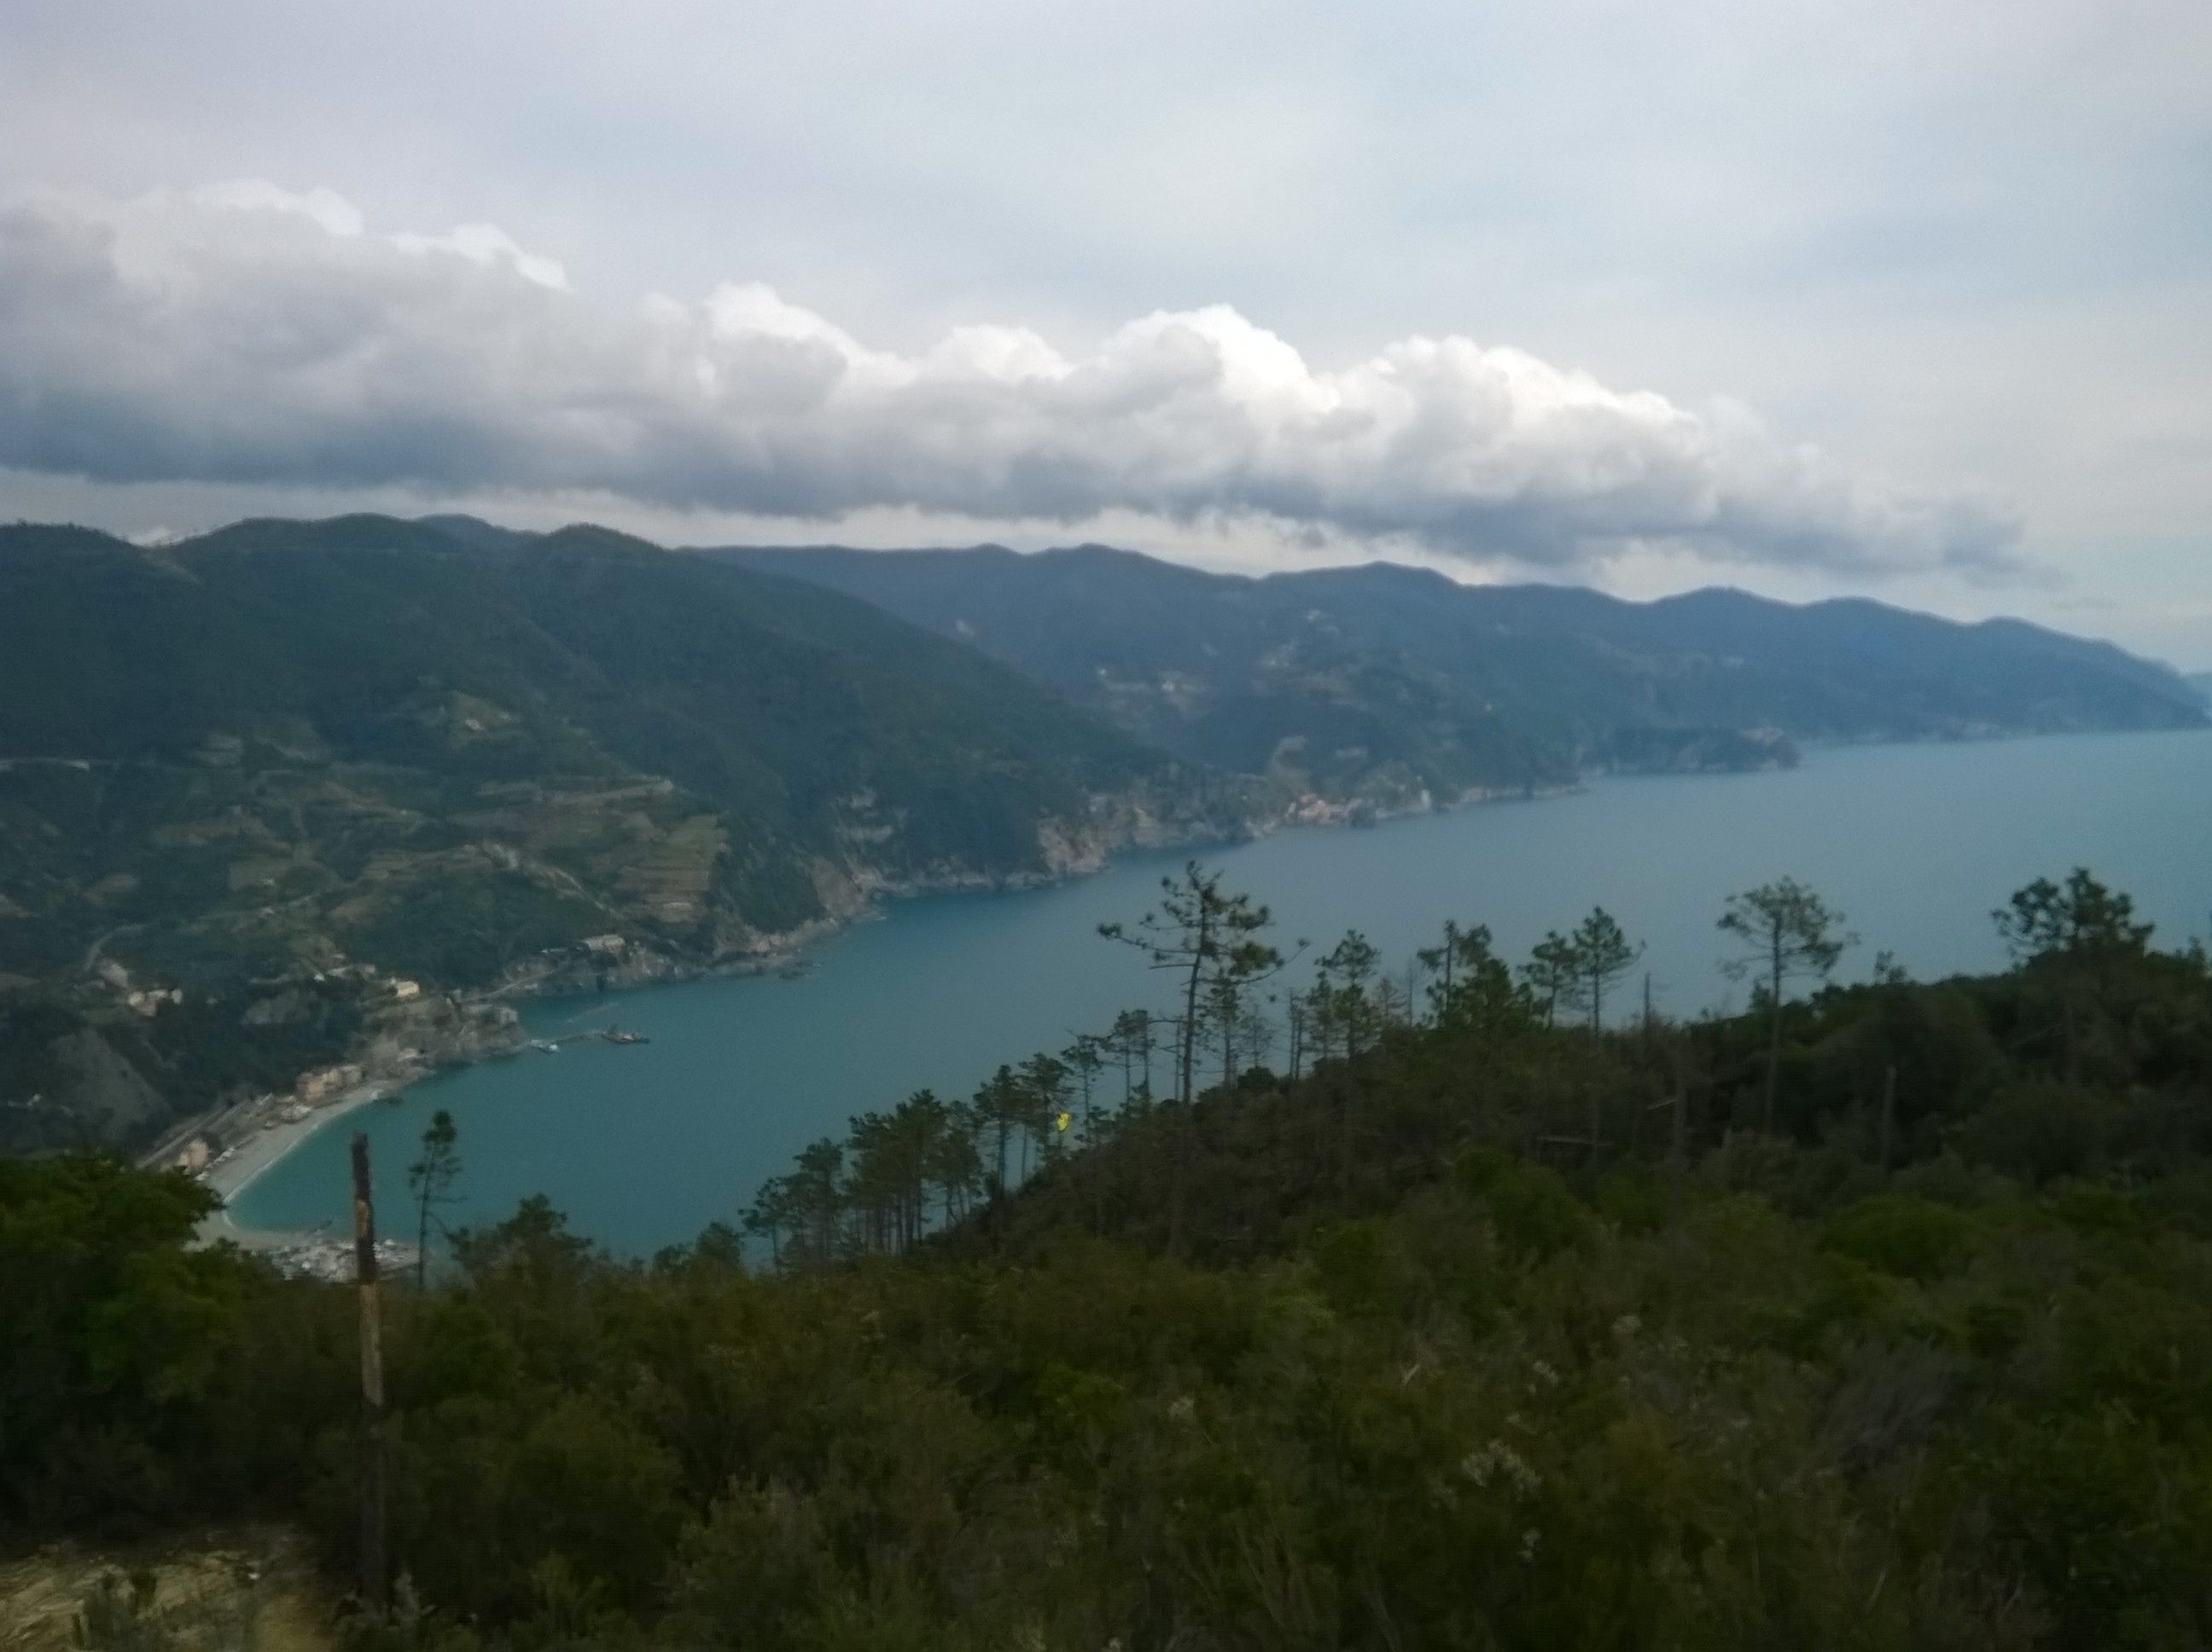 If you like go hiking, this is a good example of trail. From Levanto to Monterosso, you have the chance to enjoy an amazing sightseen.